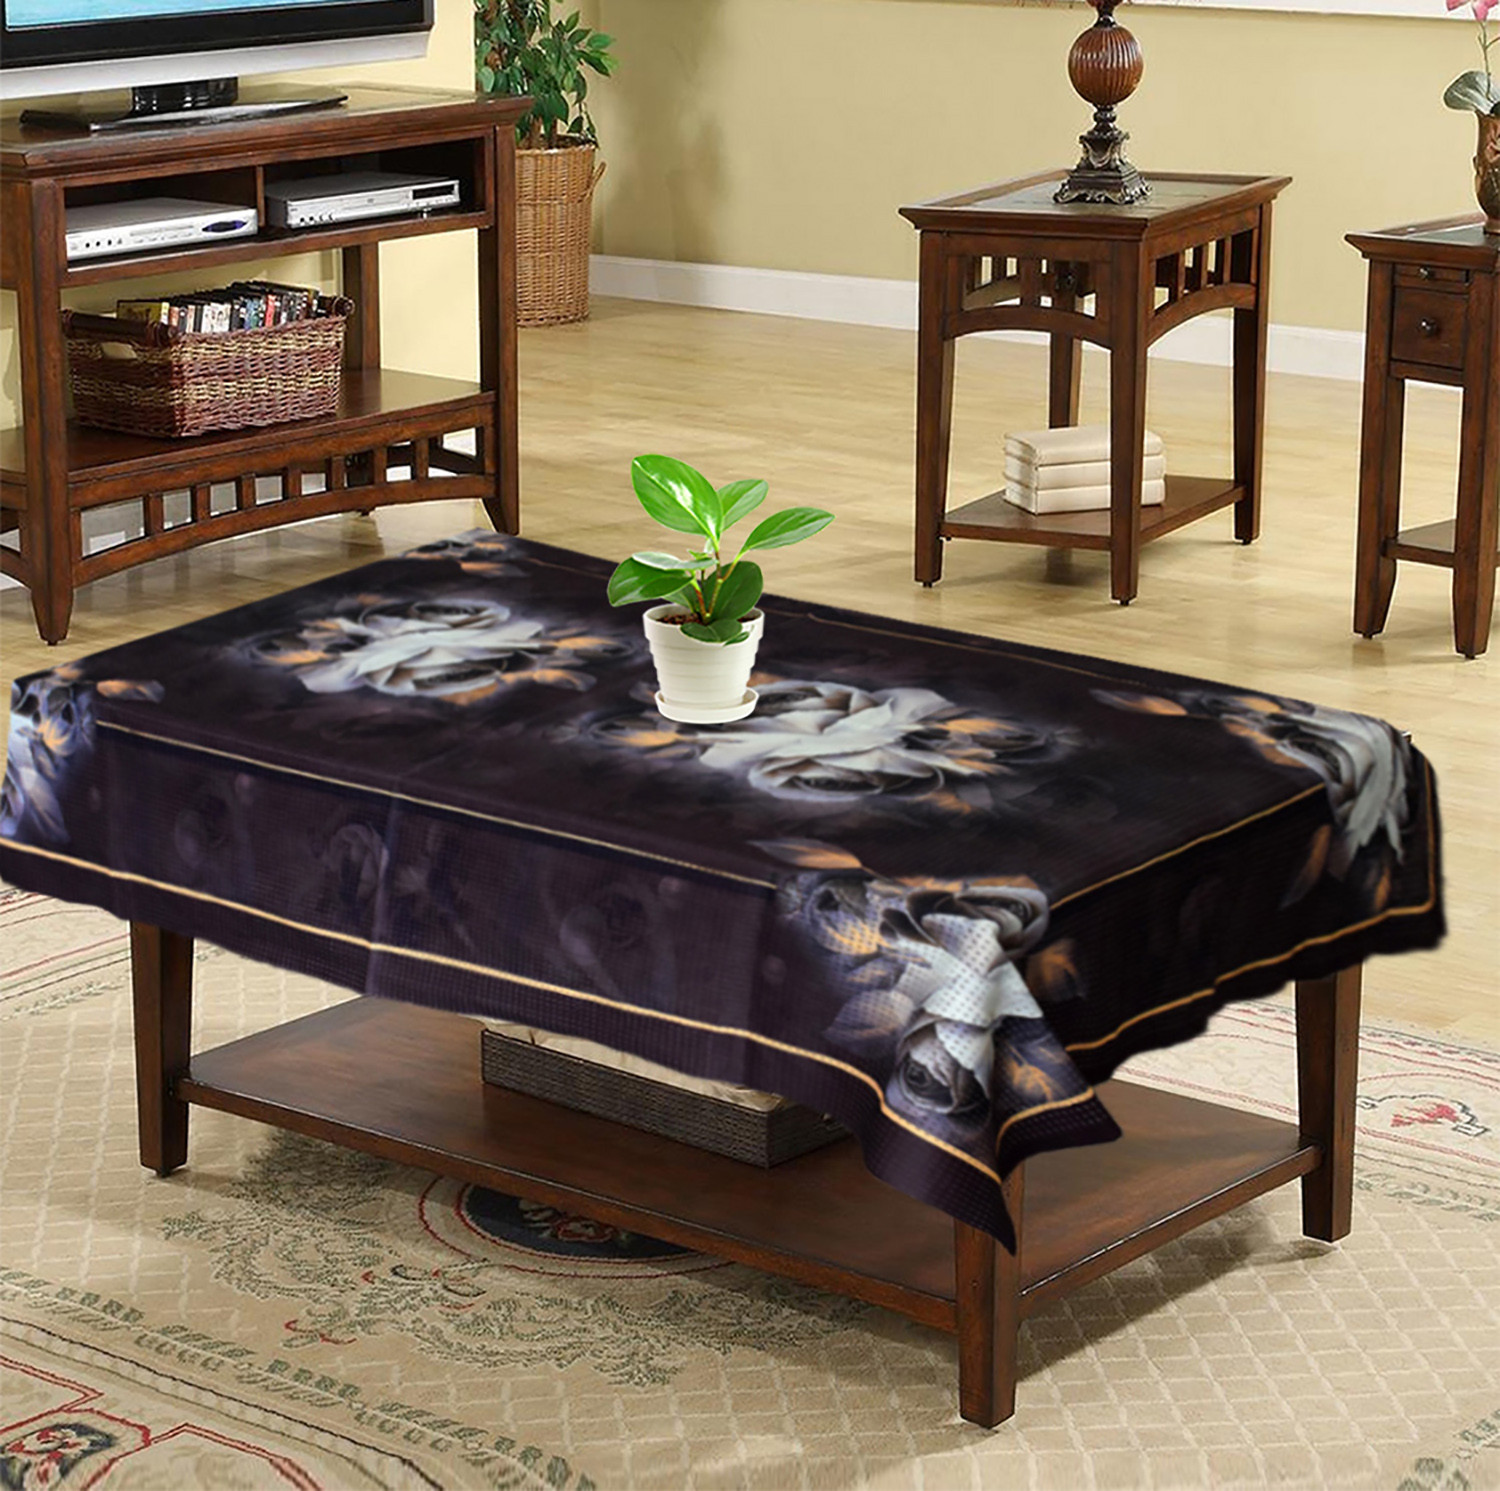 Kuber Industries Rose Printed Cotton 4 Seater Center Table Cover- 40